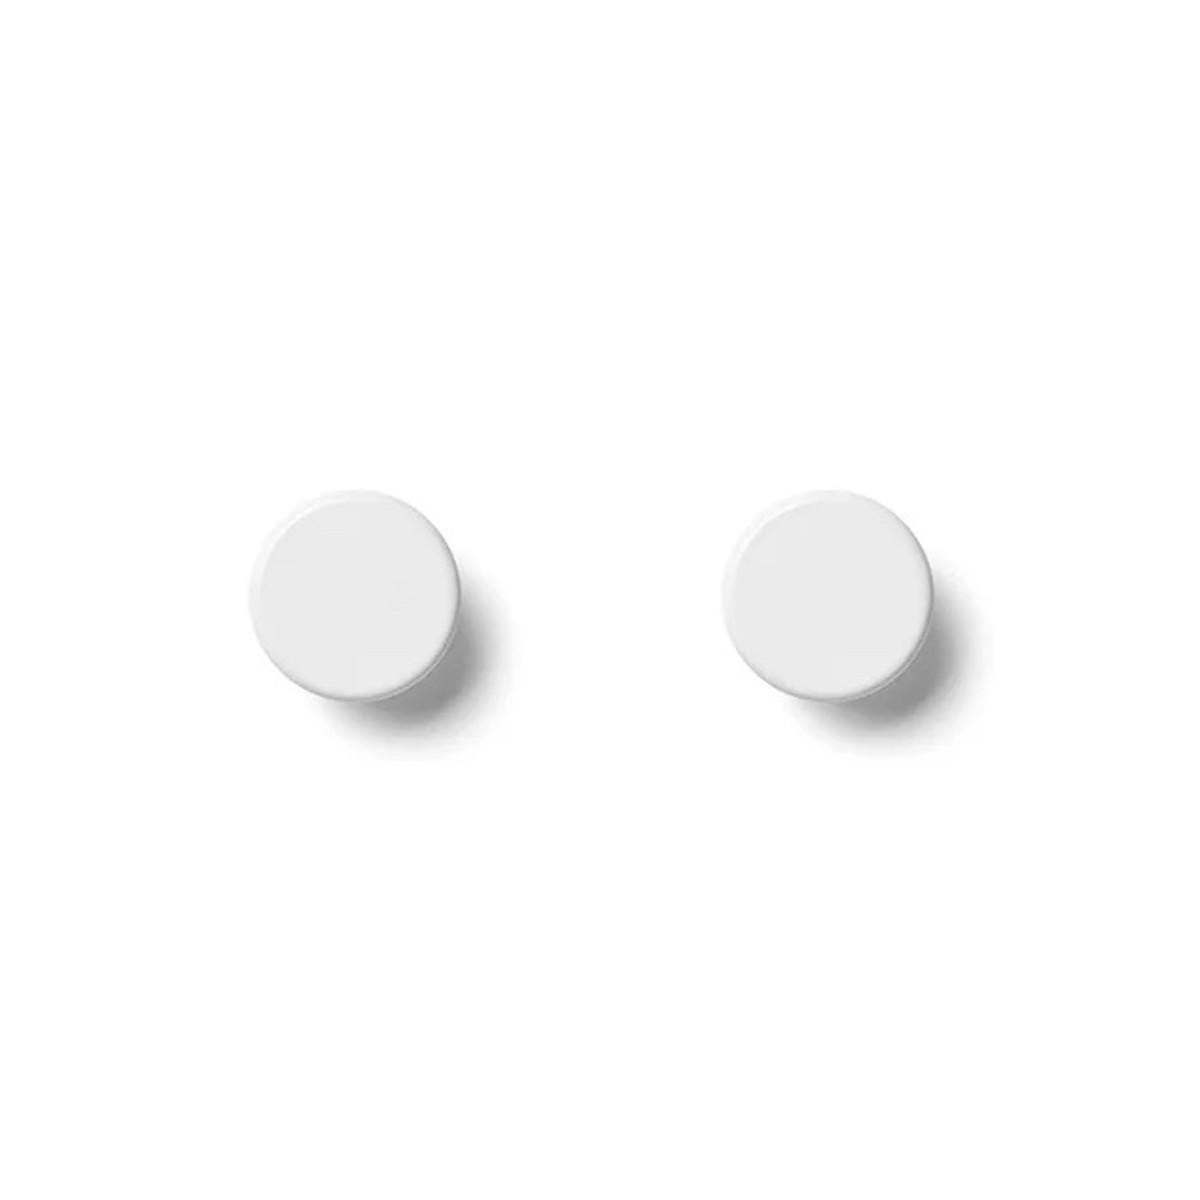 Norm - white knob – pack of 2